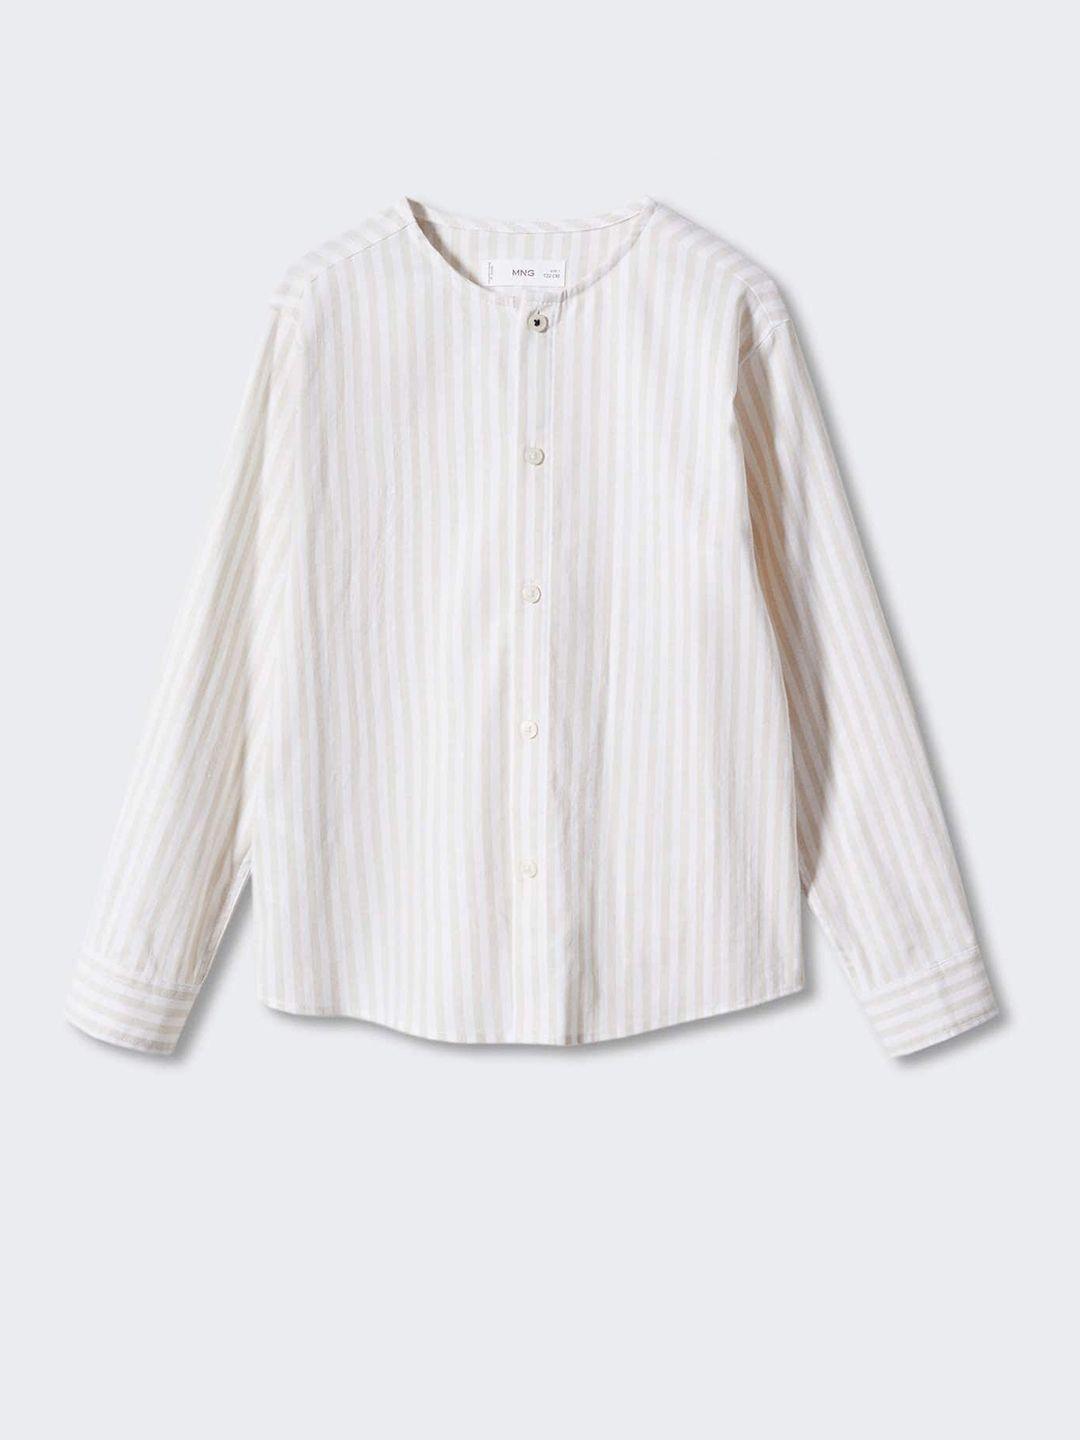 mango kids boys sustainable vertical striped casual shirt